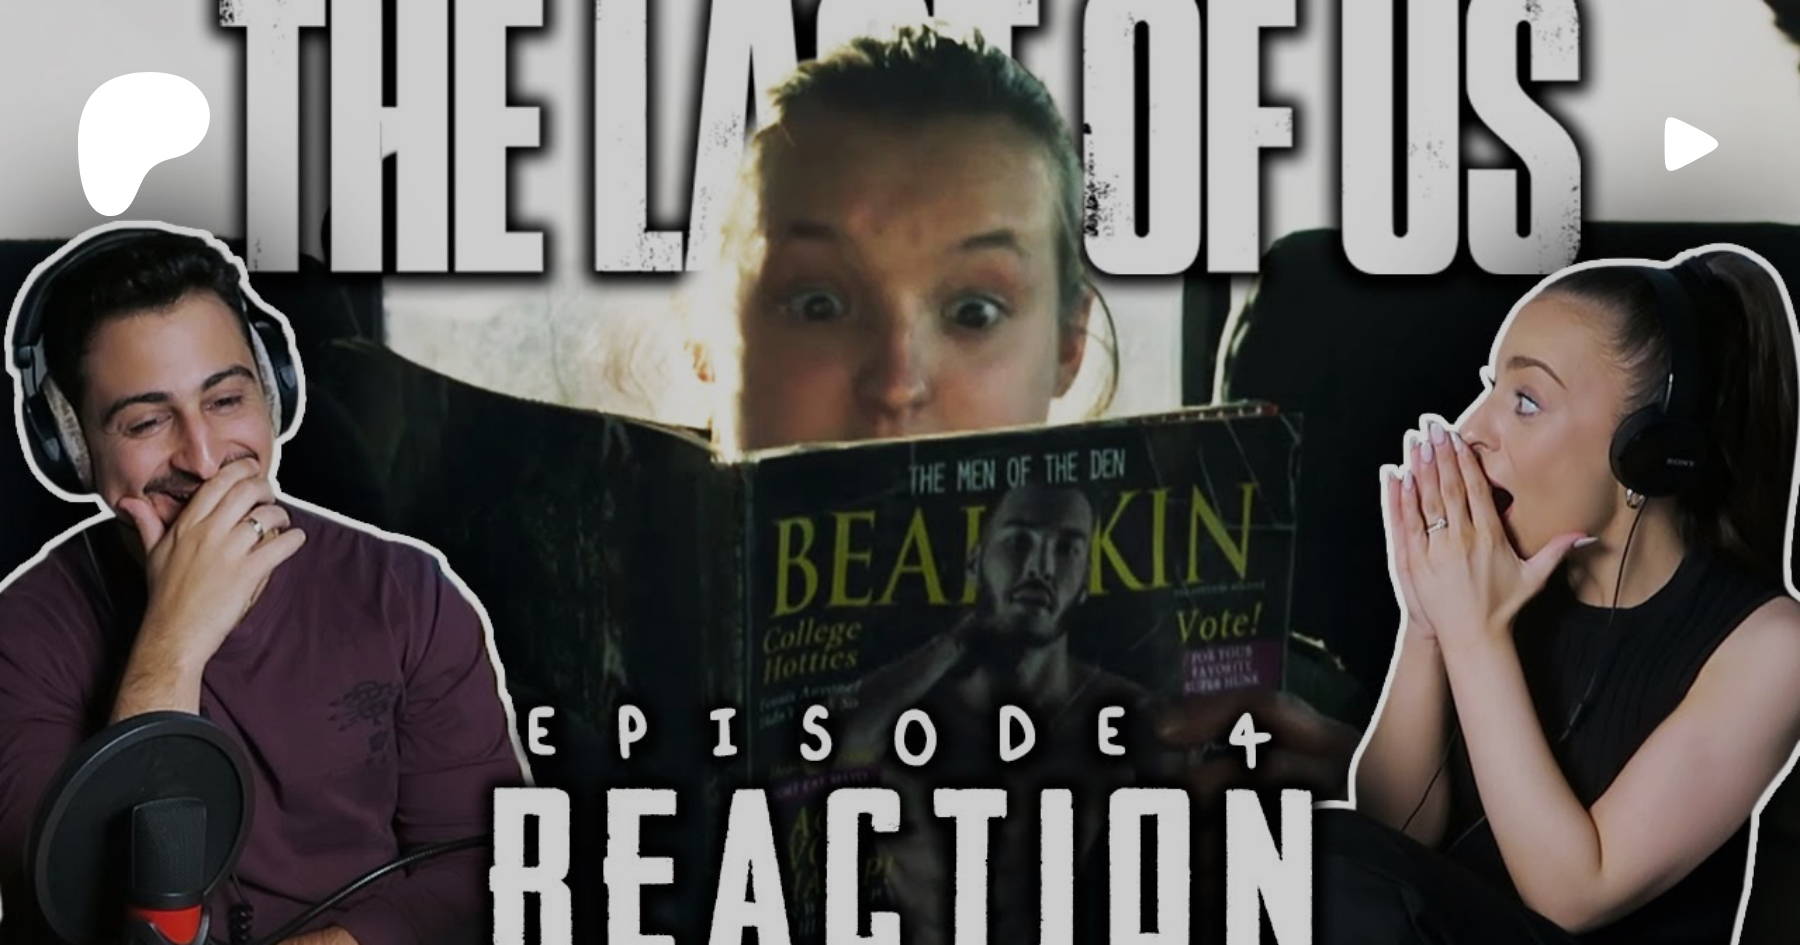 The Last of Us Episode 4 Reaction 